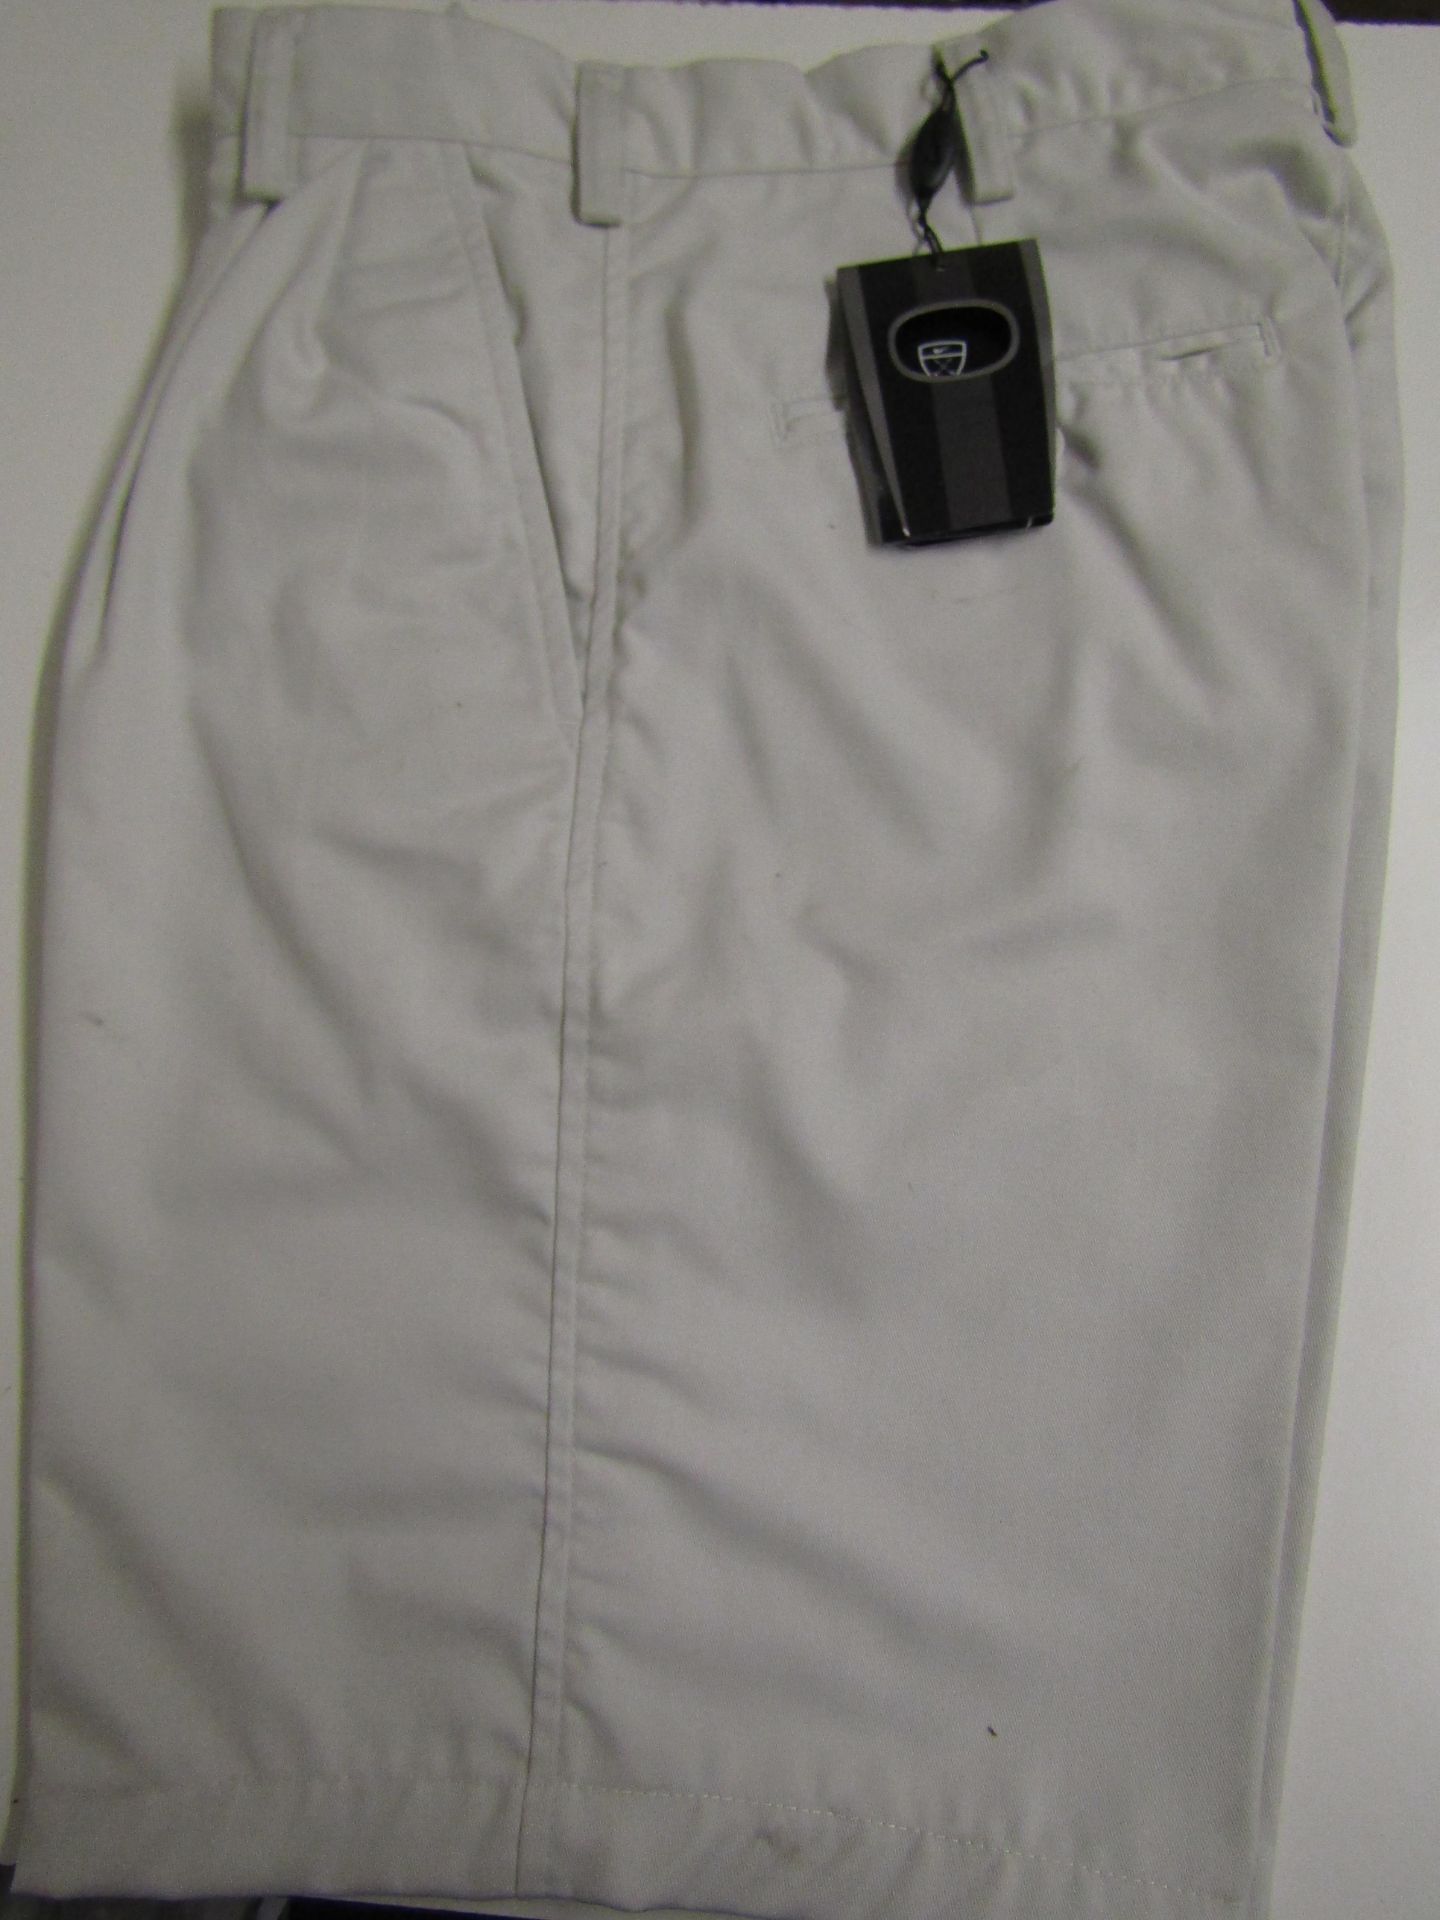 1 X Pair of Nike Golf Shorts Stone Colour Size 32-32 New With Tags